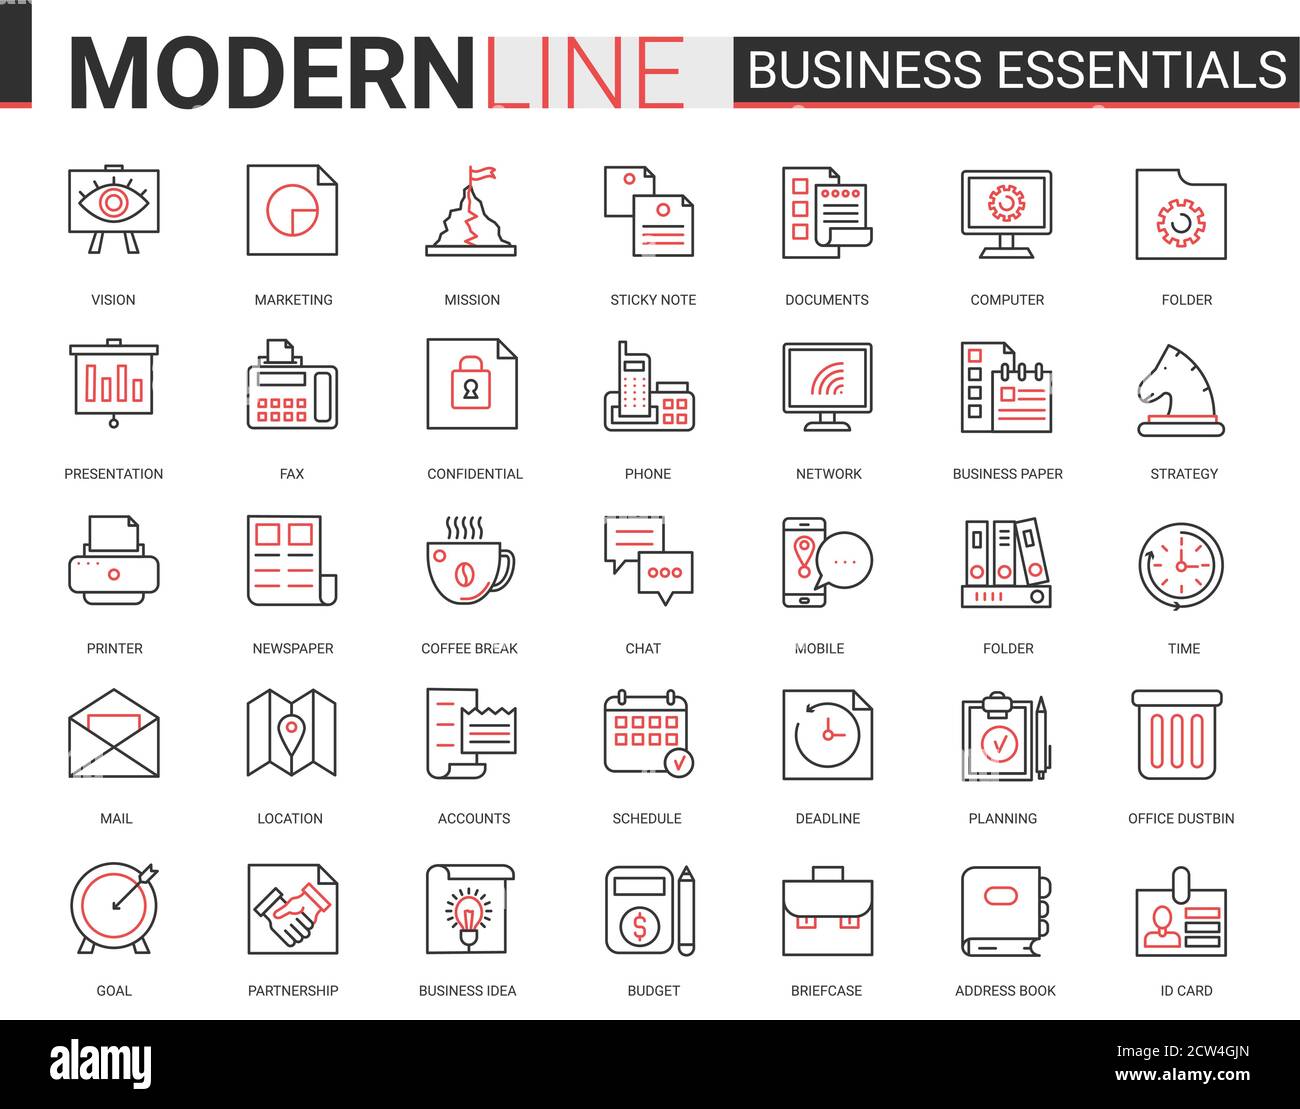 Business thin red black line icon vector illustration set. Business essential website outline pictogram symbols collection with office objects, equipment and documents for financial development Stock Vector